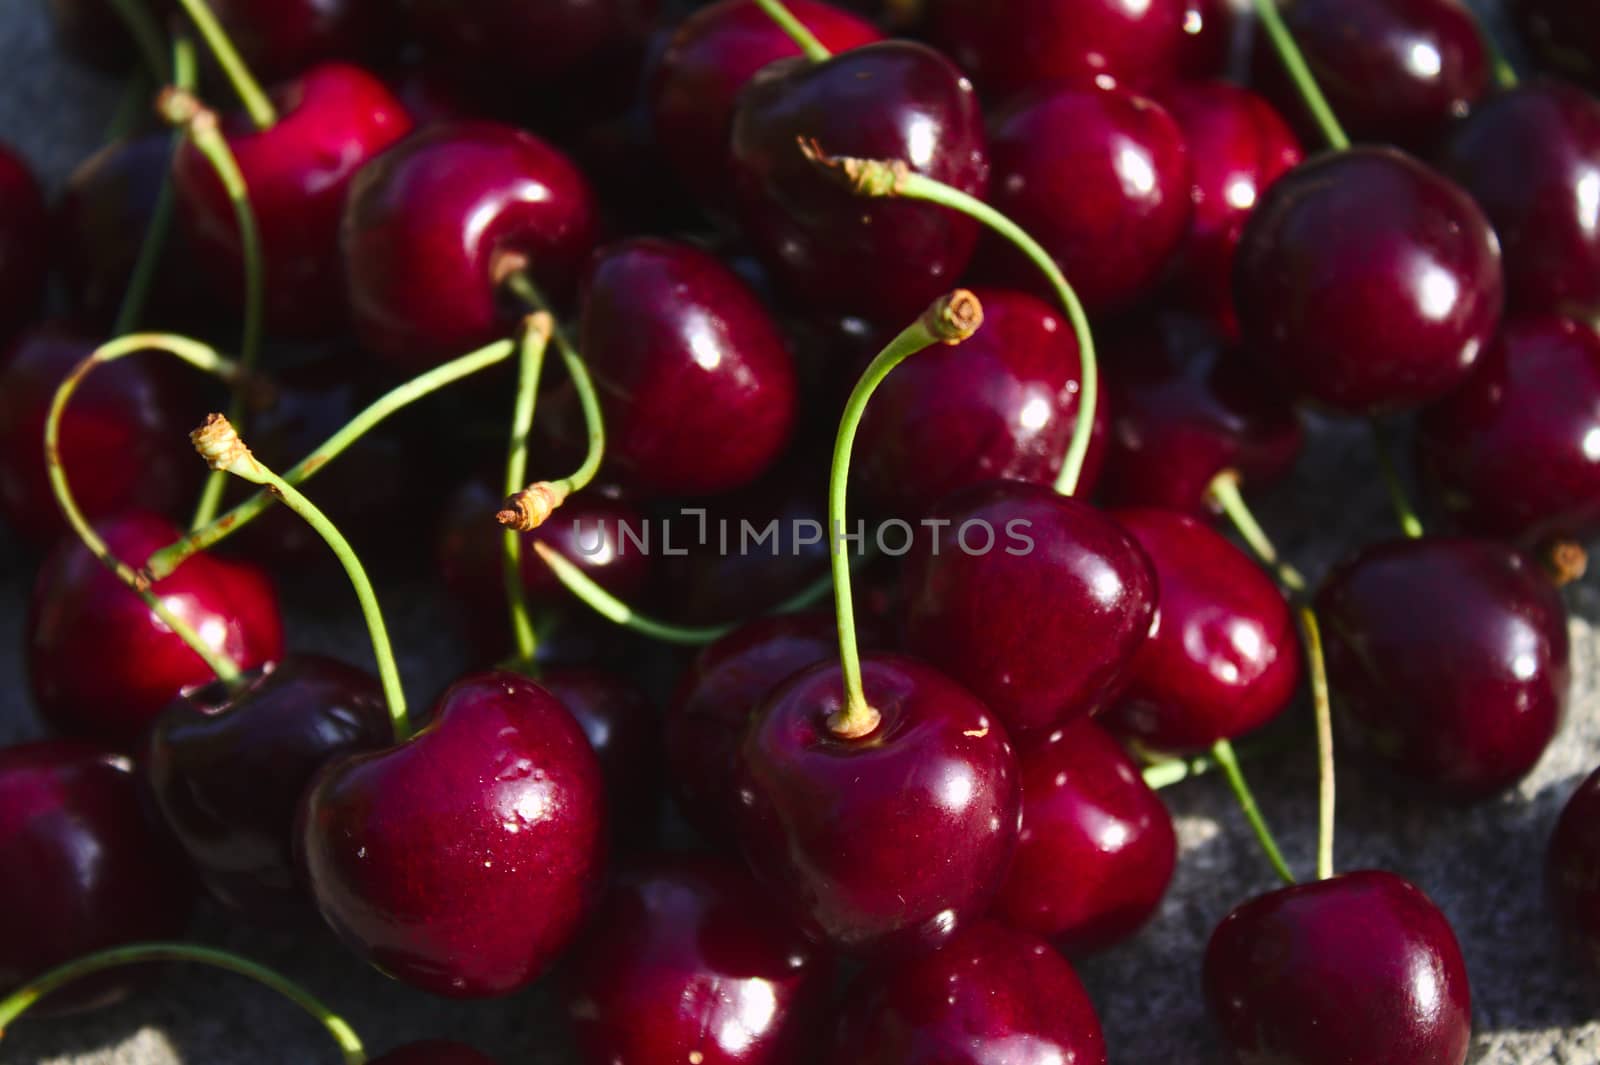 The picture shows many delicious cherries after the harvest